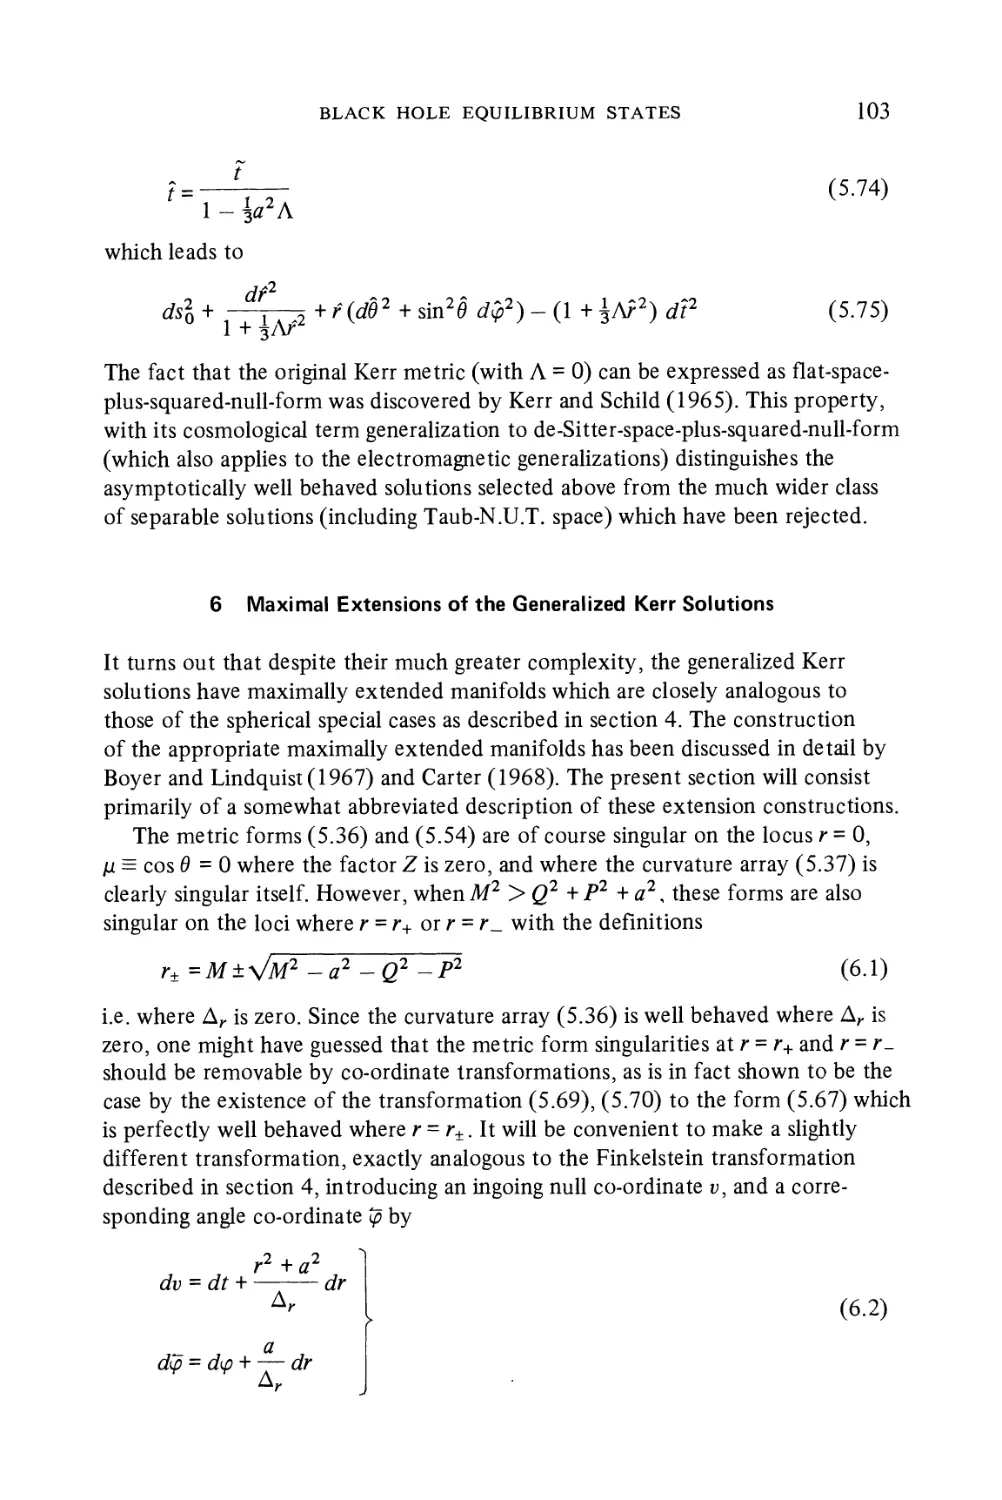 6 Maximal Extensions of the Generalized Kerr Solutions